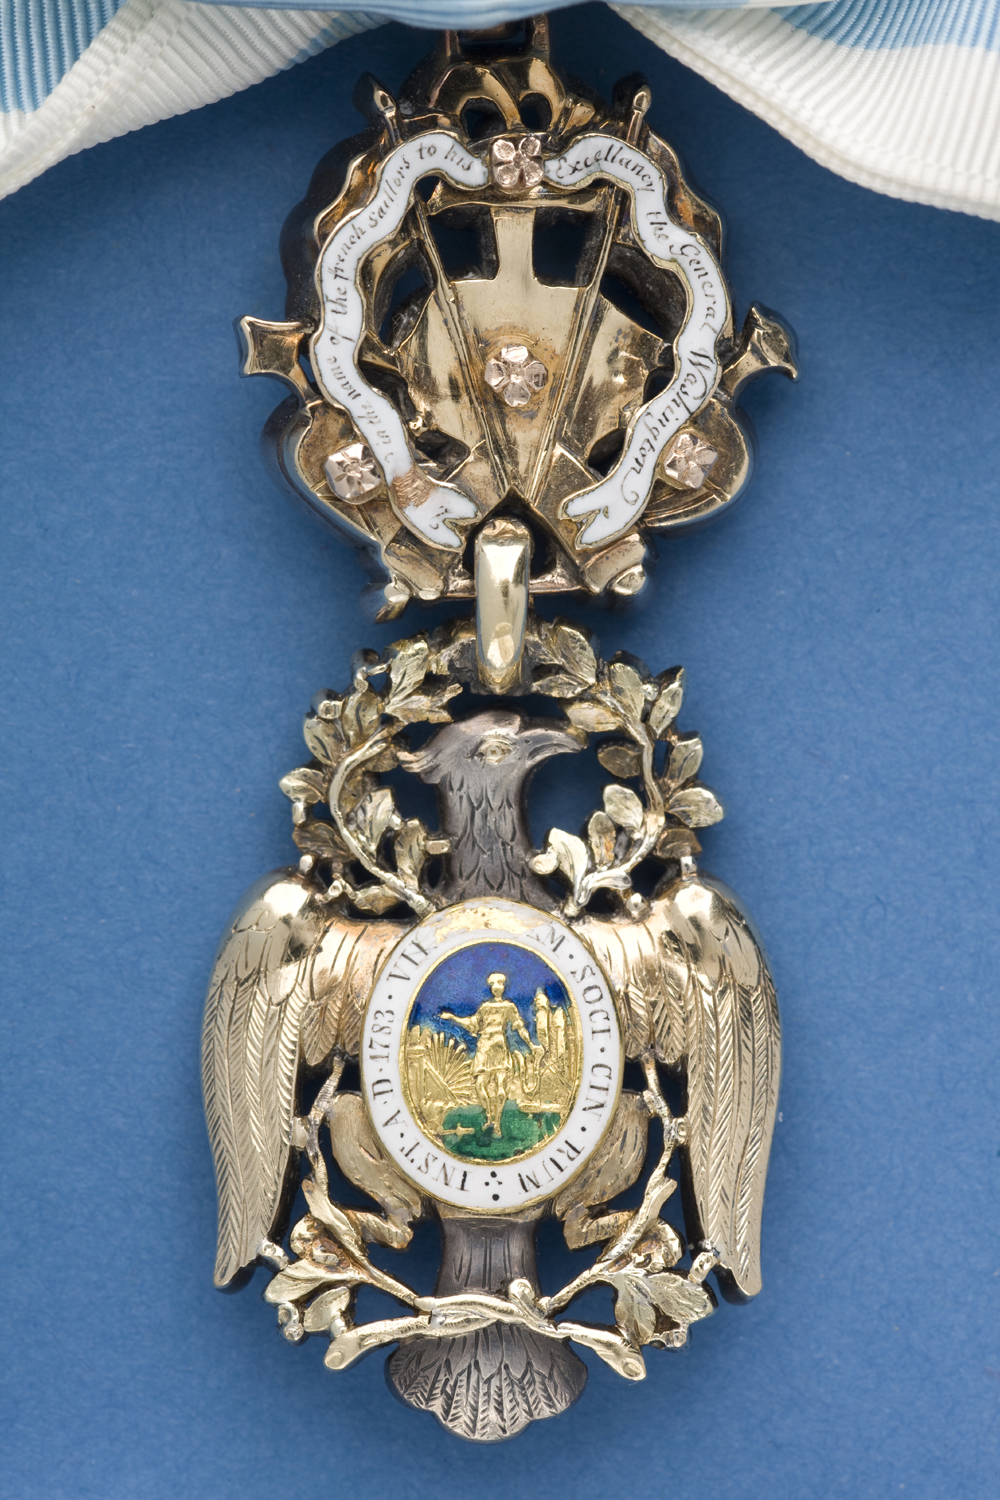 Back side of the Diamond Eagle of the Society of the Cincinnati made of gold with enamel decoration